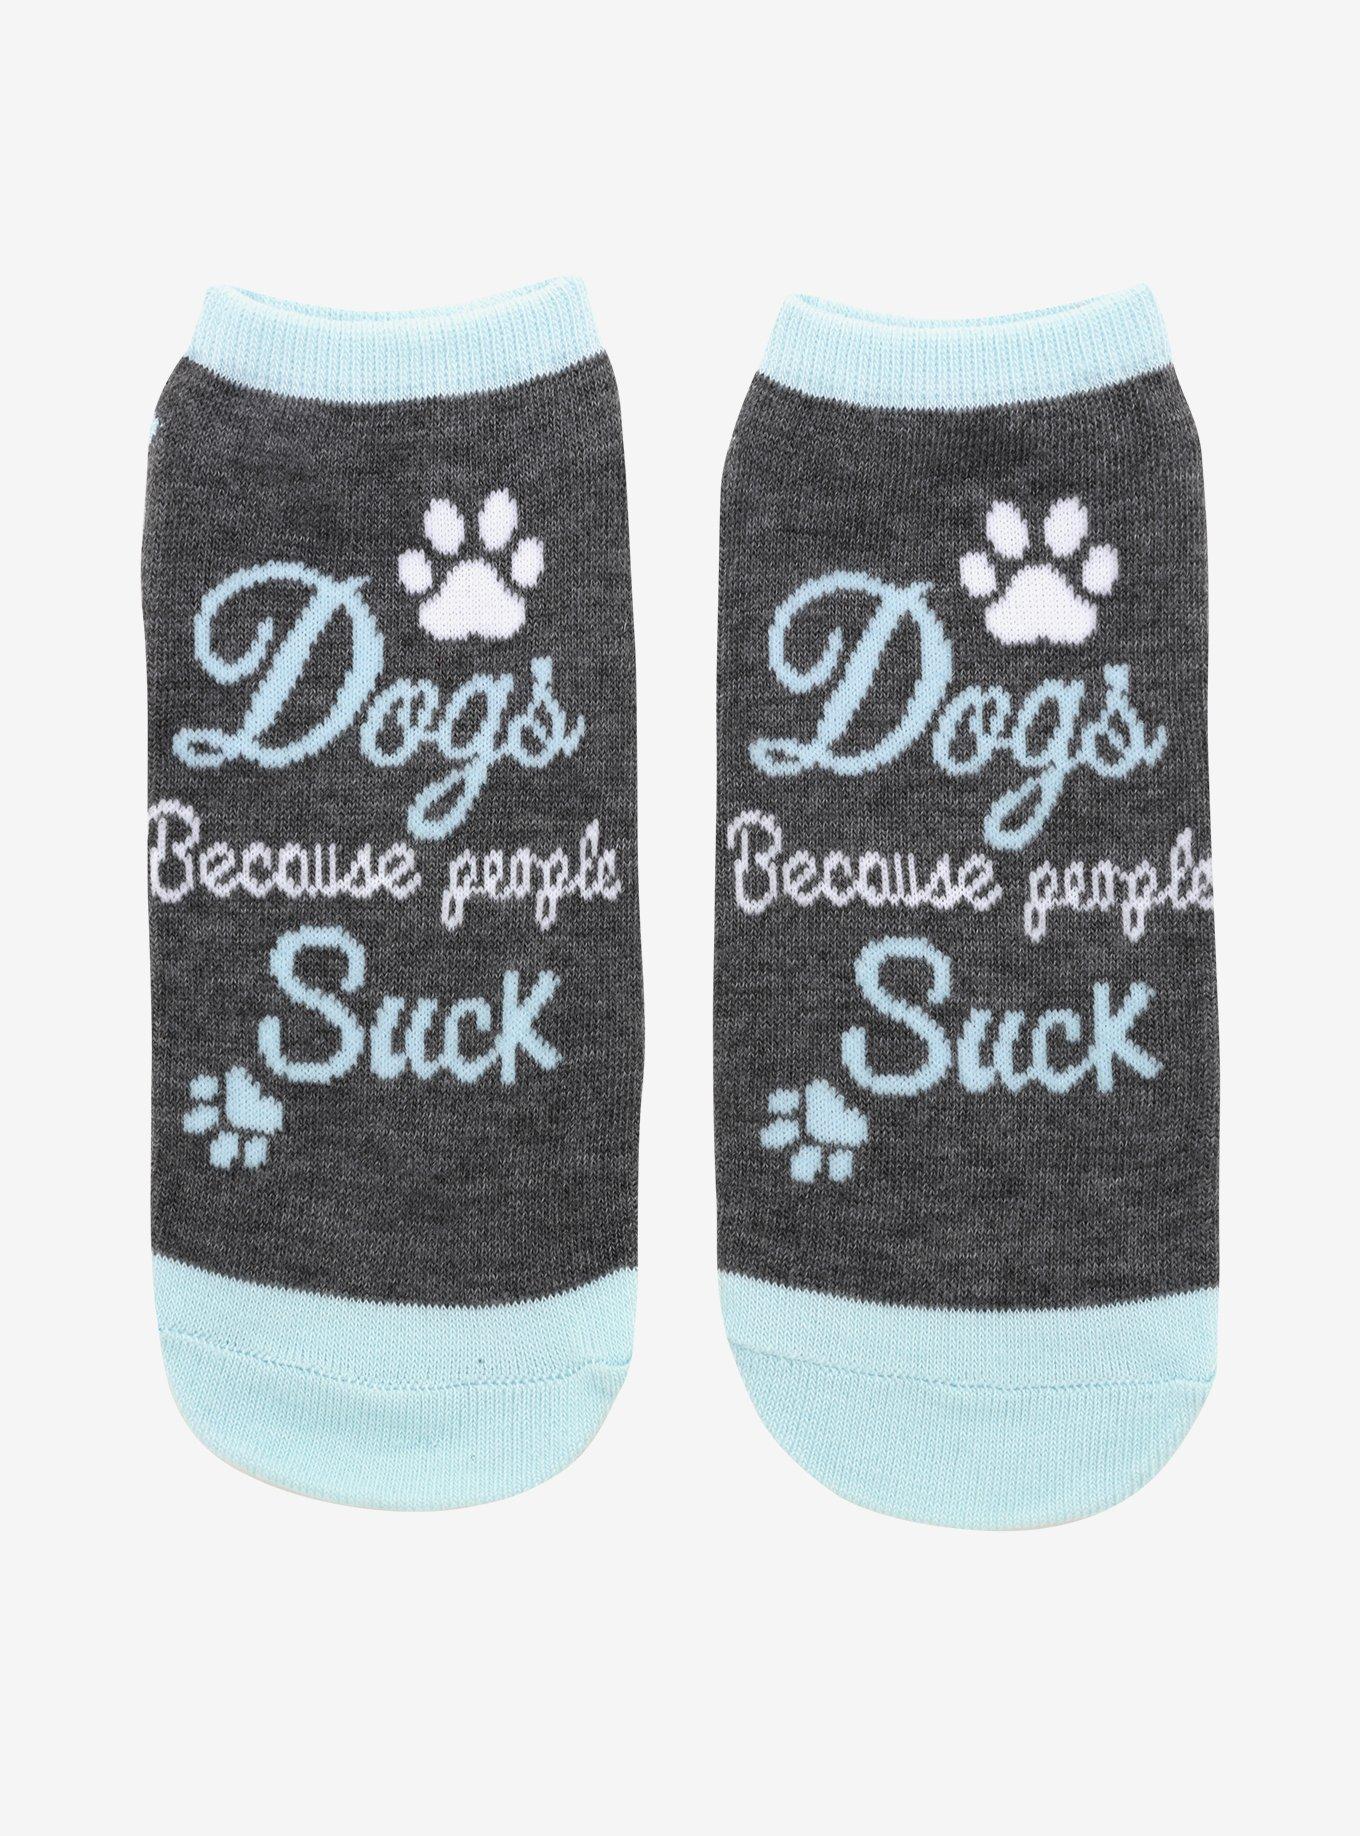 Dogs Because People Suck No-Show Socks, , hi-res